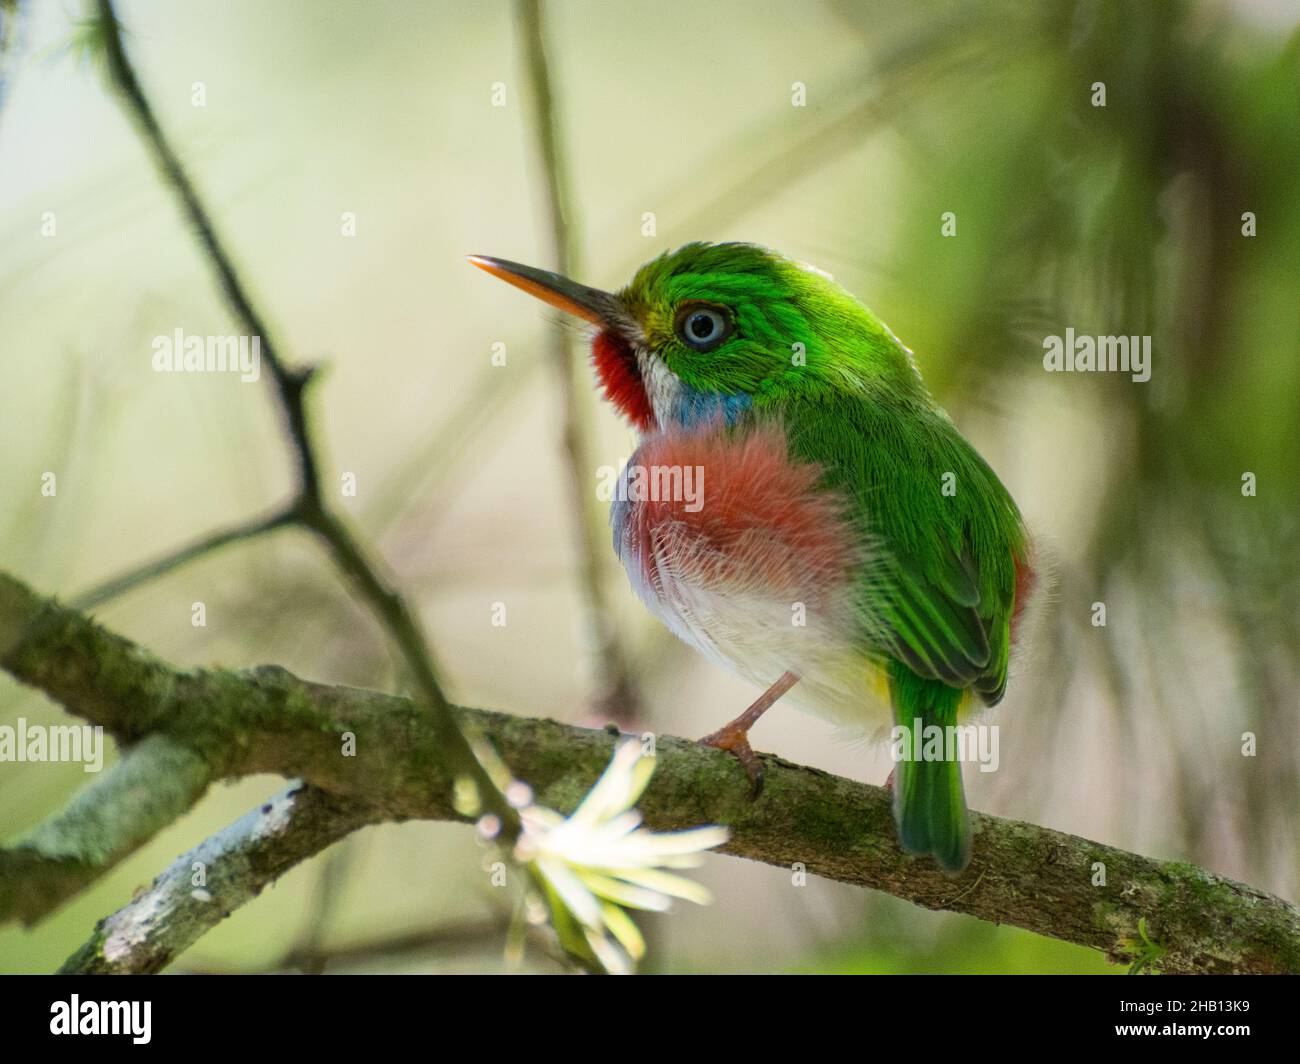 Selective focus shot of a cute Cuban tody bird perched on a tree branch during daylight Stock Photo